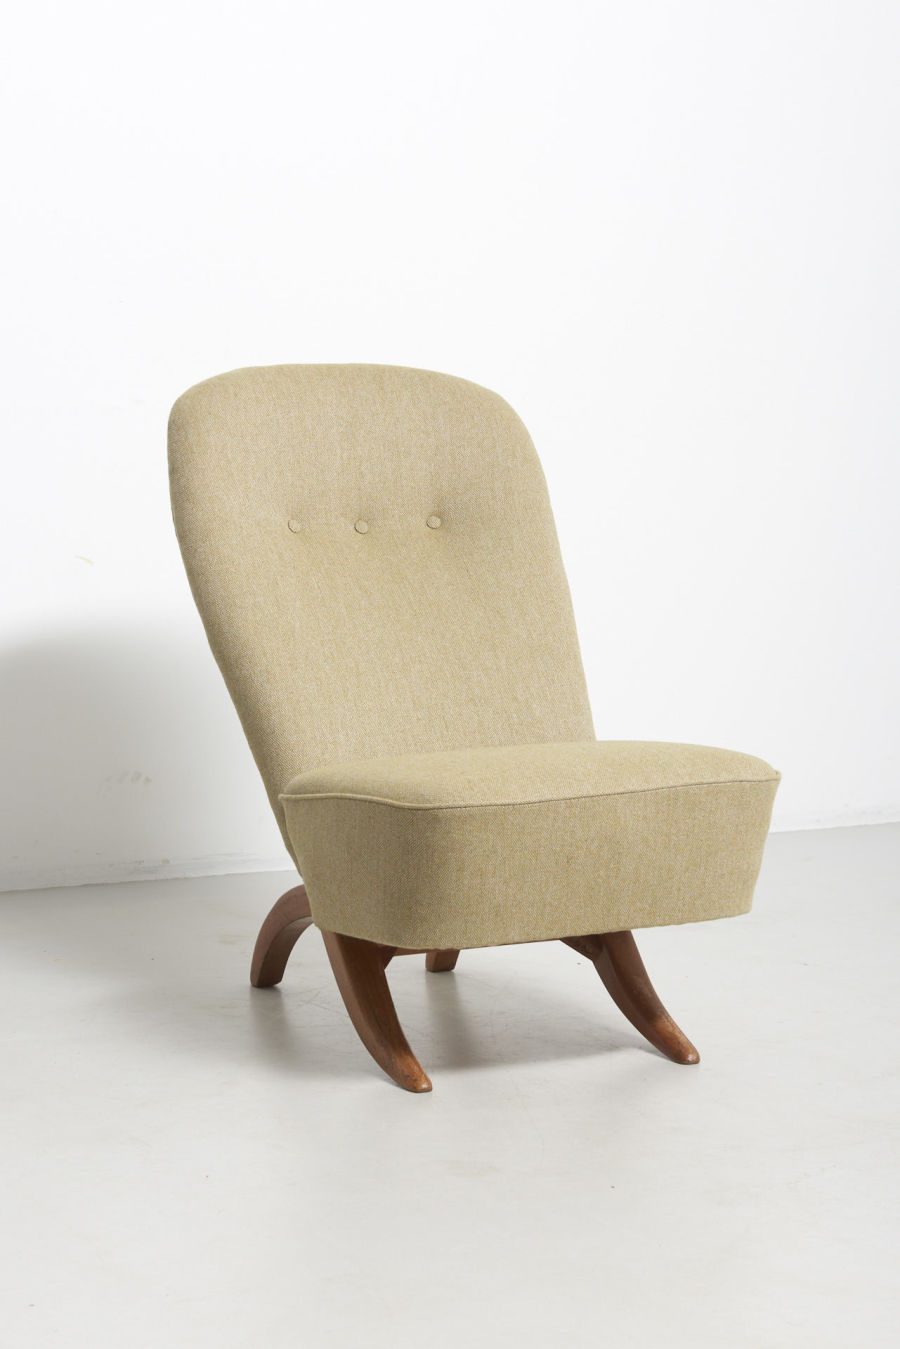 modestfurniture-vintage-2313-congo-easy-chair-theo-ruth-artifort01